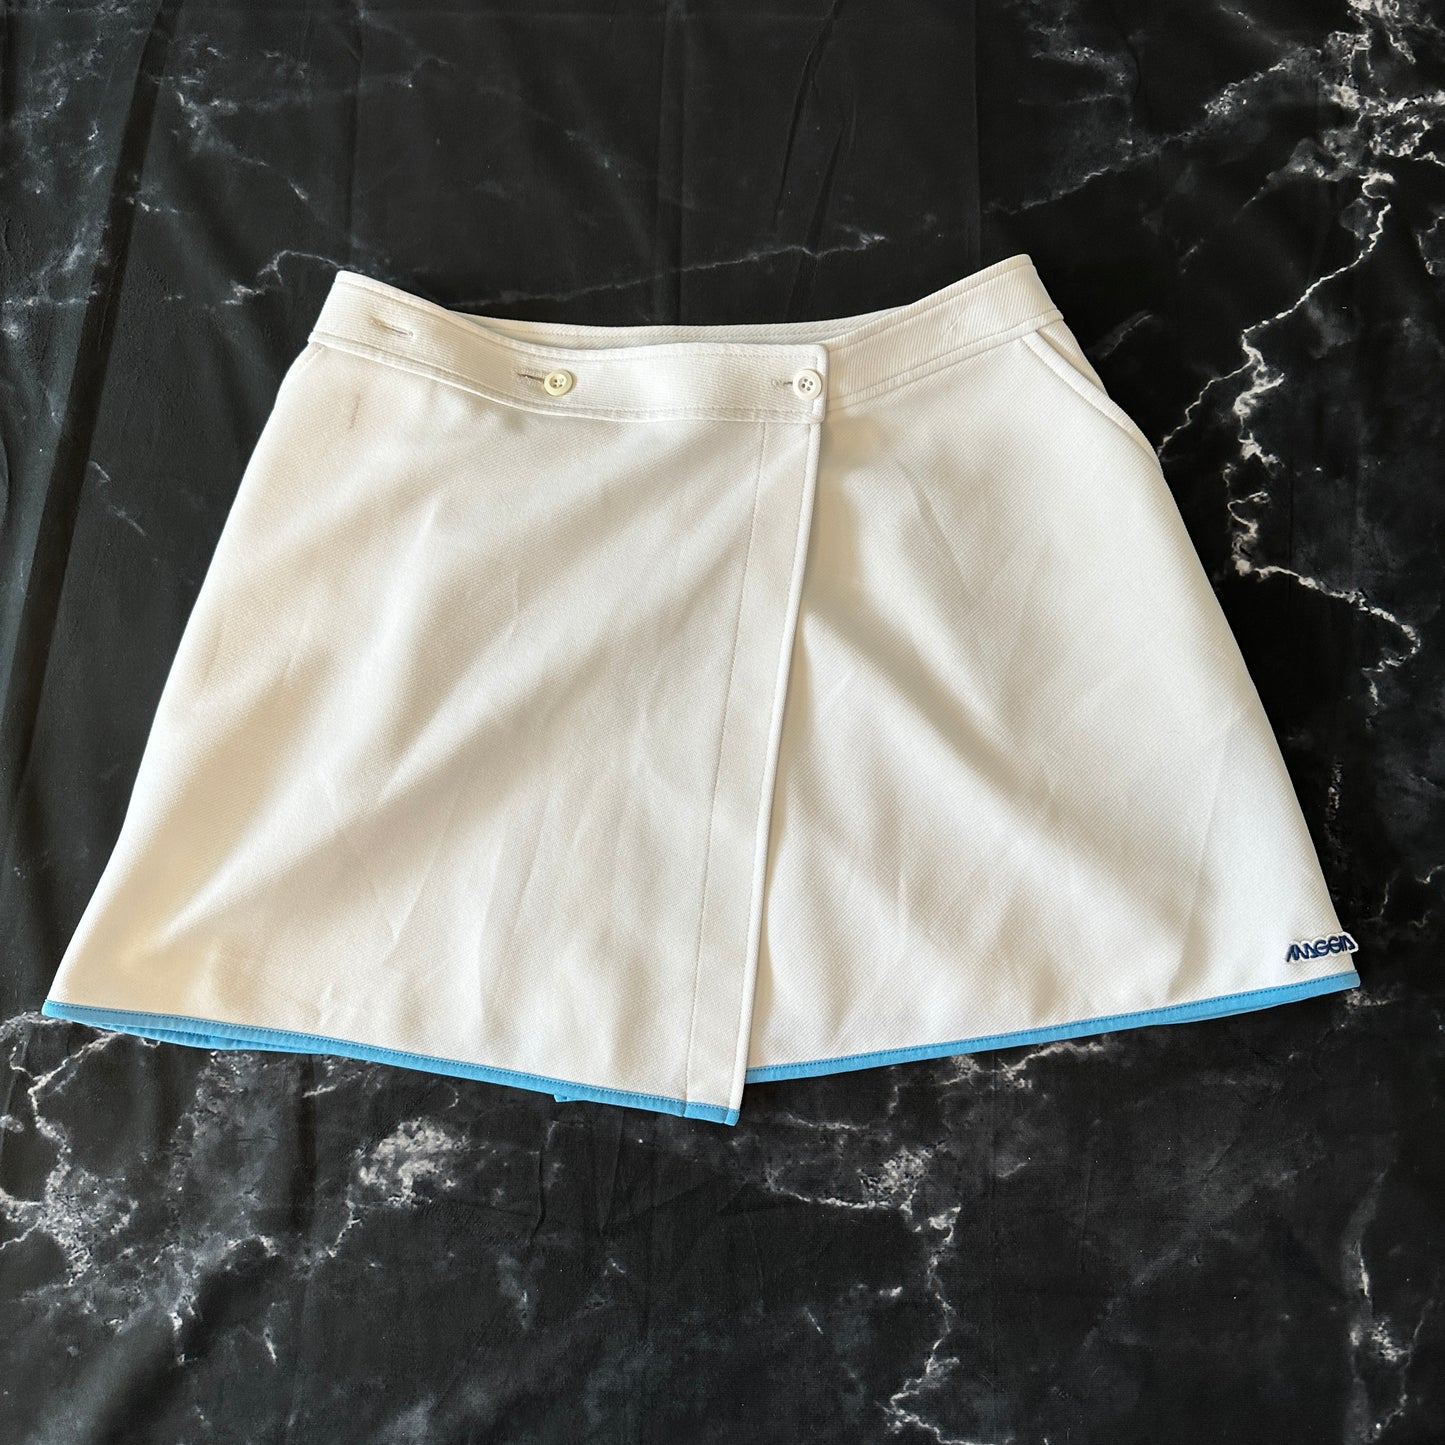 Maggia Vintage 80s Tennis Skirt - IV - Made in Italy